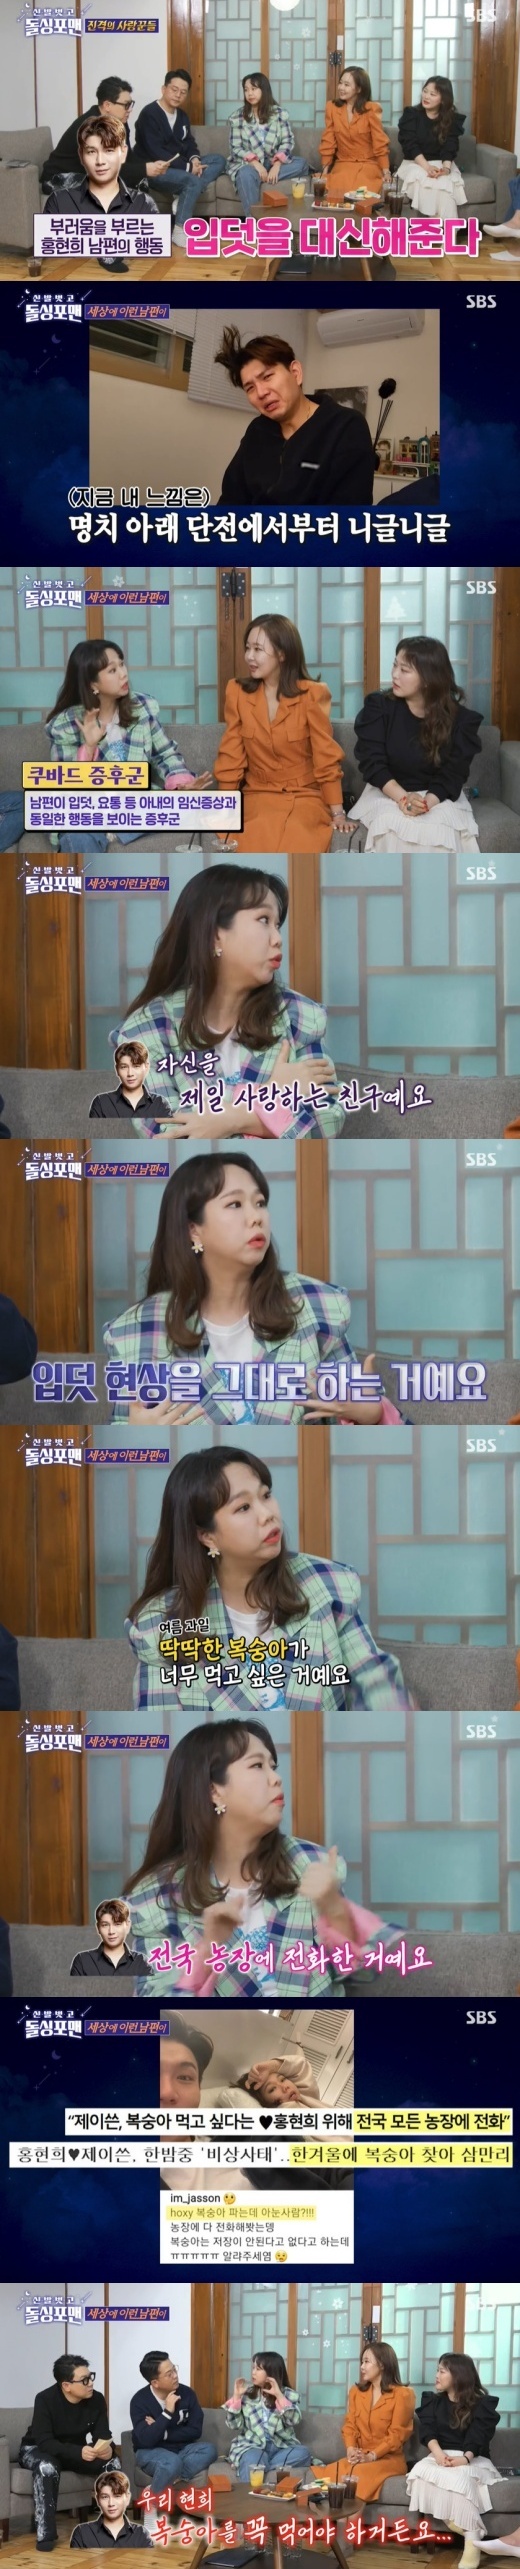 Broadcaster Hong Hyun-hee showed affection for her husband, Jessie J.SBS shoes naked stone forman broadcasted on the night of 29th appeared marriage 12 years of Sim Jinhwa, 9 years of owner, 4 years of Hong Hyun Hee.On this day, the cast of Dolsing Forman heard three things of Jessie J, who is jealous. The third place was Jessie J, who always comes to pick up from the worry of Hong Hyun Hee drinking outside.Hong Hyun-hee said, I originally drank a lot of alcohol before marriage and did not go home until dawn.In the summer, two women ate 10,000 cc of beer, he said. But Jessie J does not drink well.I am worried and love Hani is coming. I come when I come now. Jessie J is a good emotional expressive person even if she does not drink, he said. When she was in love, she took a hotel looptop that Jessie J often went to.I had to drink a glass of champagne, and Jessie J. had two Bartles, thinking she was like me, and she took me home, drunk and drunk.I was my sister and I counted Hani. I saw the receipt and it was expensive enough to stay.I was more attracted to you because you wanted to save me like a jewel. Jessie J. Hong Hyun-hee, who replaces morning sickness, said, It is called Cubad syndrome. Jessie J is the person who thinks of herself the most terrible.I am so distressed by the morning sickness phenomenon for about 12 weeks. I was grateful that I understood and cared more from then on. Cubad syndrome is a syndrome in which the husband shows the same behavior as his wifes pregnancy symptoms such as morning sickness and back pain.He also mentioned the list of Hong Hyun Hee shopping carts that collected topics.Hong Hyun-hees food list, which Jessie J posted on SNS, was full of hard-to-reach things such as Plum pickles dipped in 30-year-old craftsman.Hong Hyun-hee said, I wanted to eat too much peaches, but Jessie J called all the farms nationwide.There are things that should not be done when I am pregnant. Finally, Jessie J, who said, Hong Hyun Hee is more beautiful than Han Ji-min, was selected. Hong Hyun-hee said, If it is not beautiful, I am next to you anyway.I did it even if I said it. Frankly, the whole nation knows. He laughed, pulled a tissue, covered his nose and mouth and said, Look at your eyes.I actually met Han Ji-min, and Nam Ju-hyuk said that the depth of his eyes resembles Han Ji-min. 